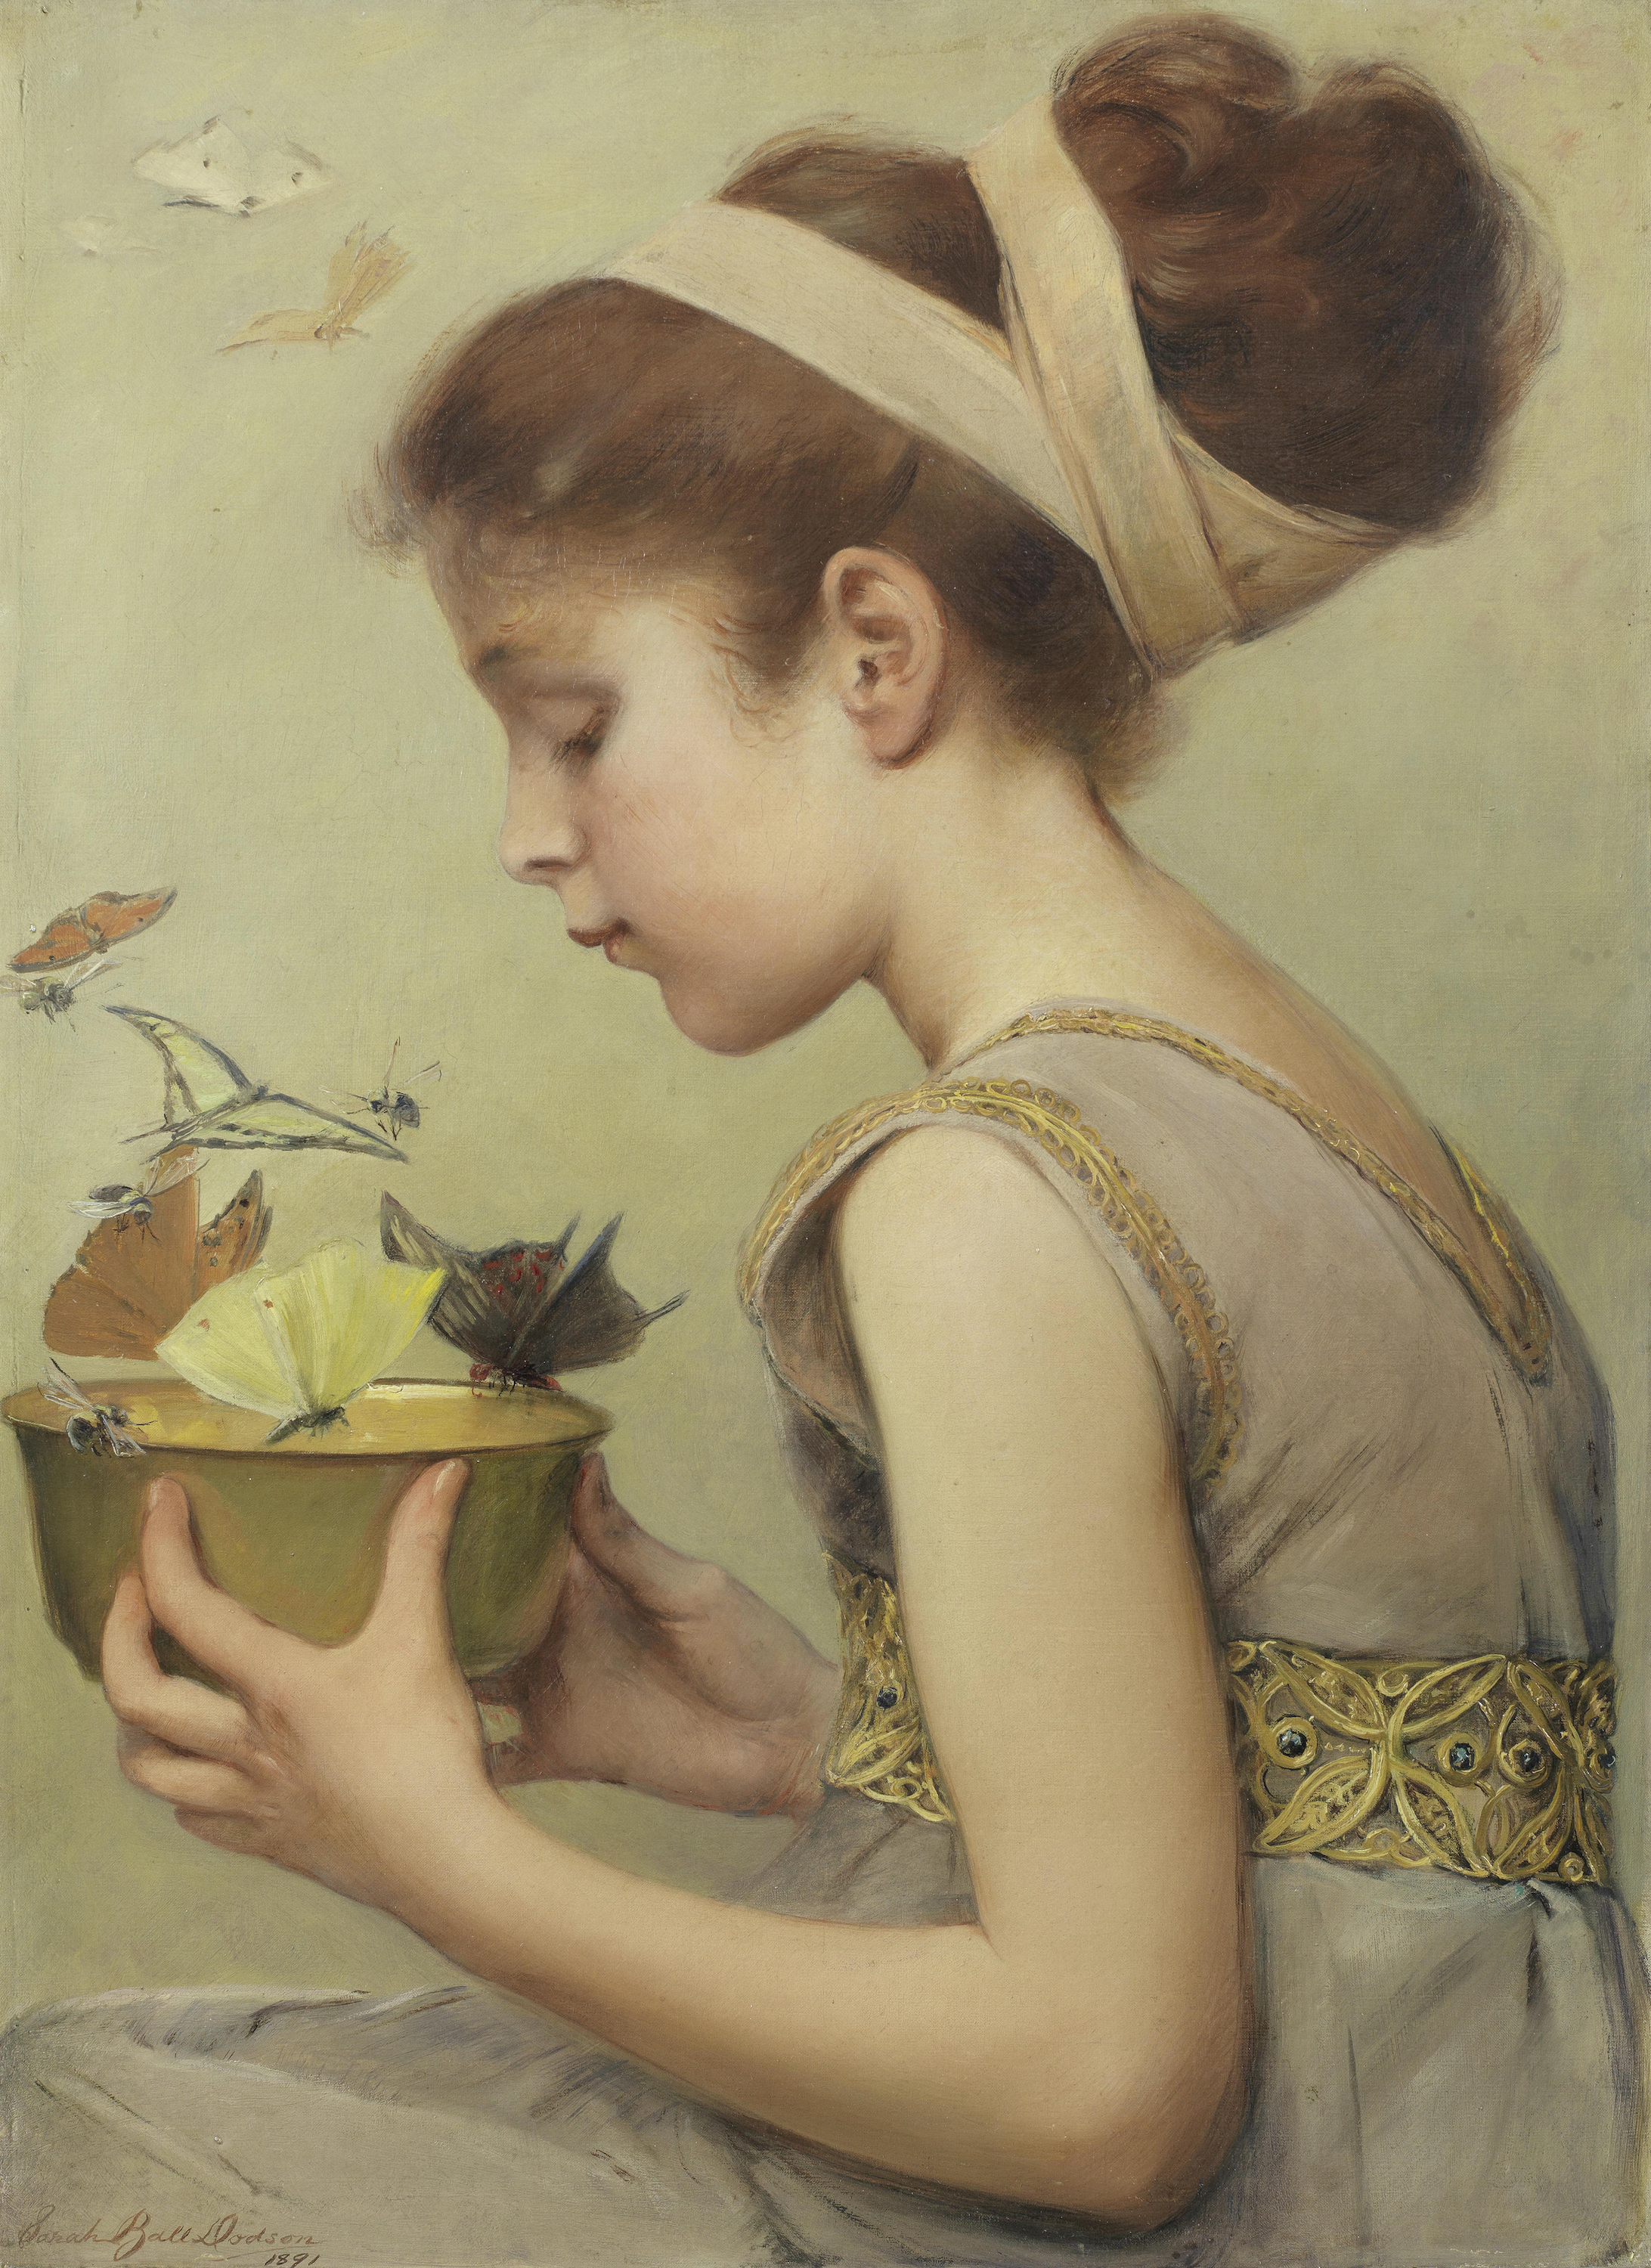 Butterflies by Sarah Paxton - 1891 - 57 x 42.5cm private collection